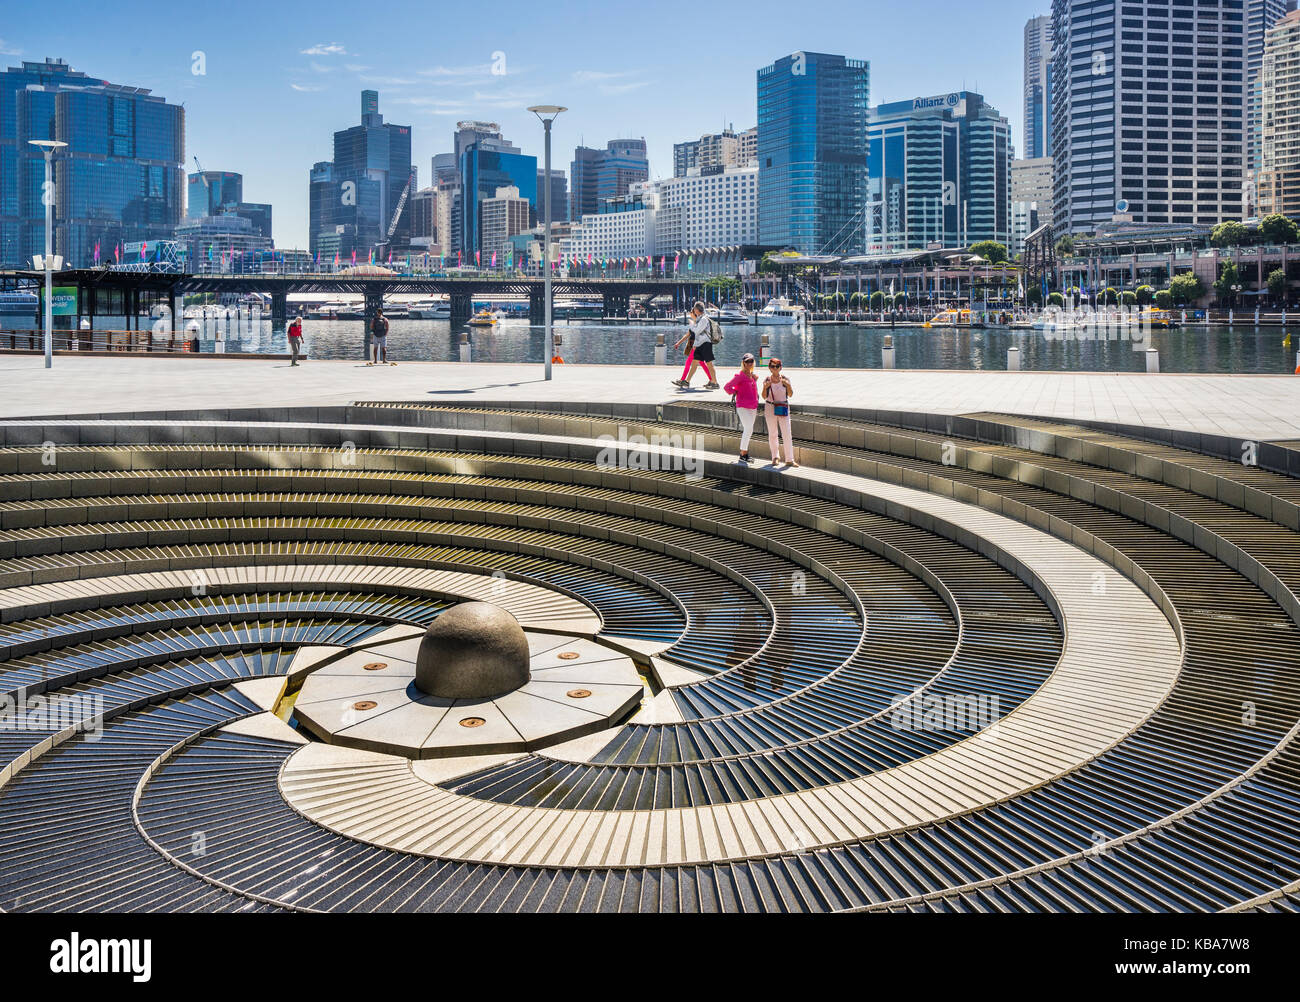 Australia, New South Wales, Sydney, Darling Harbour, Tidal Cascades Water Instalation Stock Photo